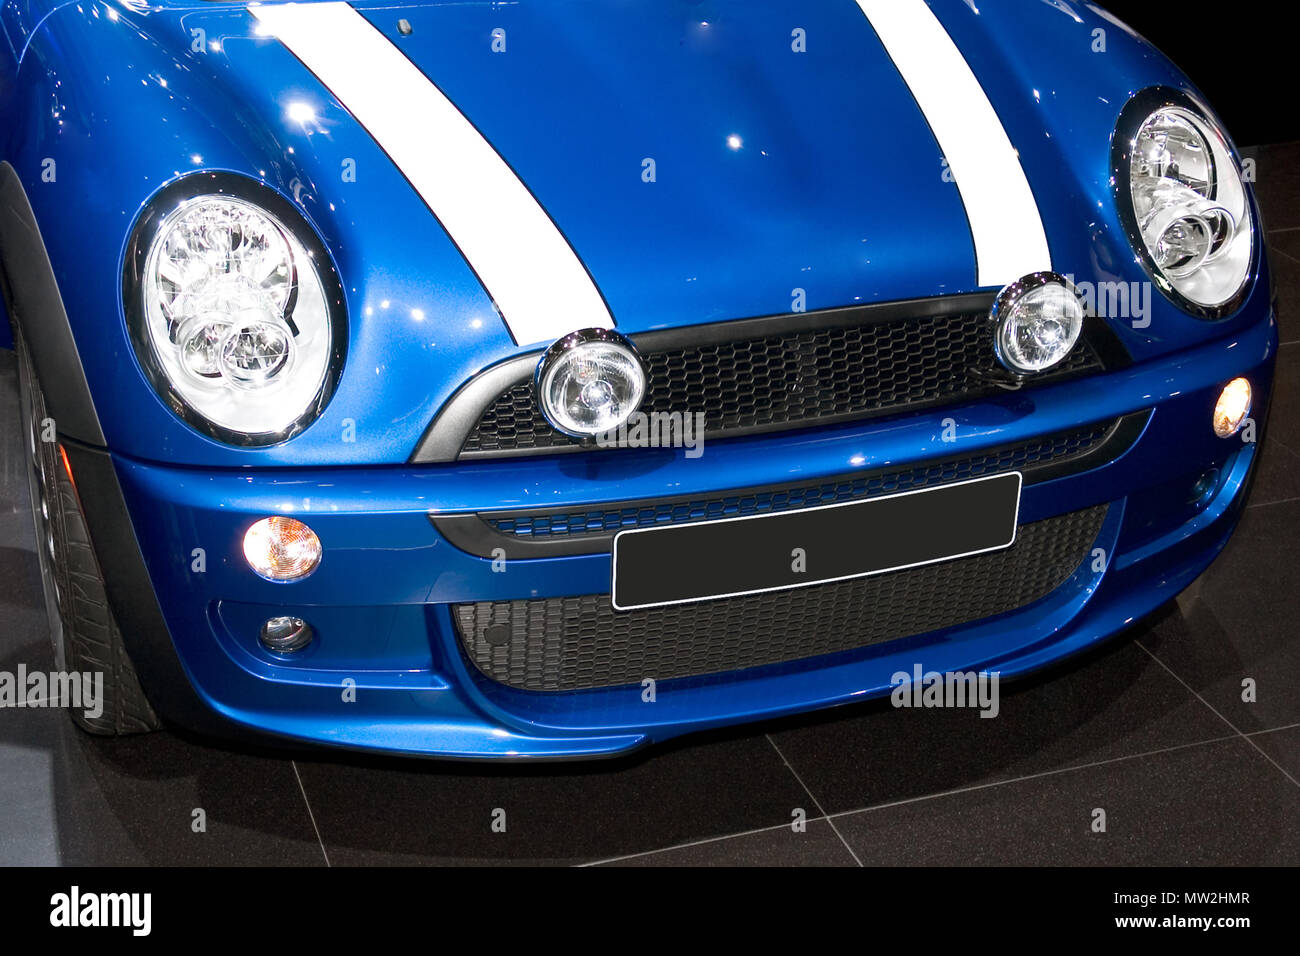 Front end of a blue Mini Cooper car. More car photos available in my gallery. Stock Photo